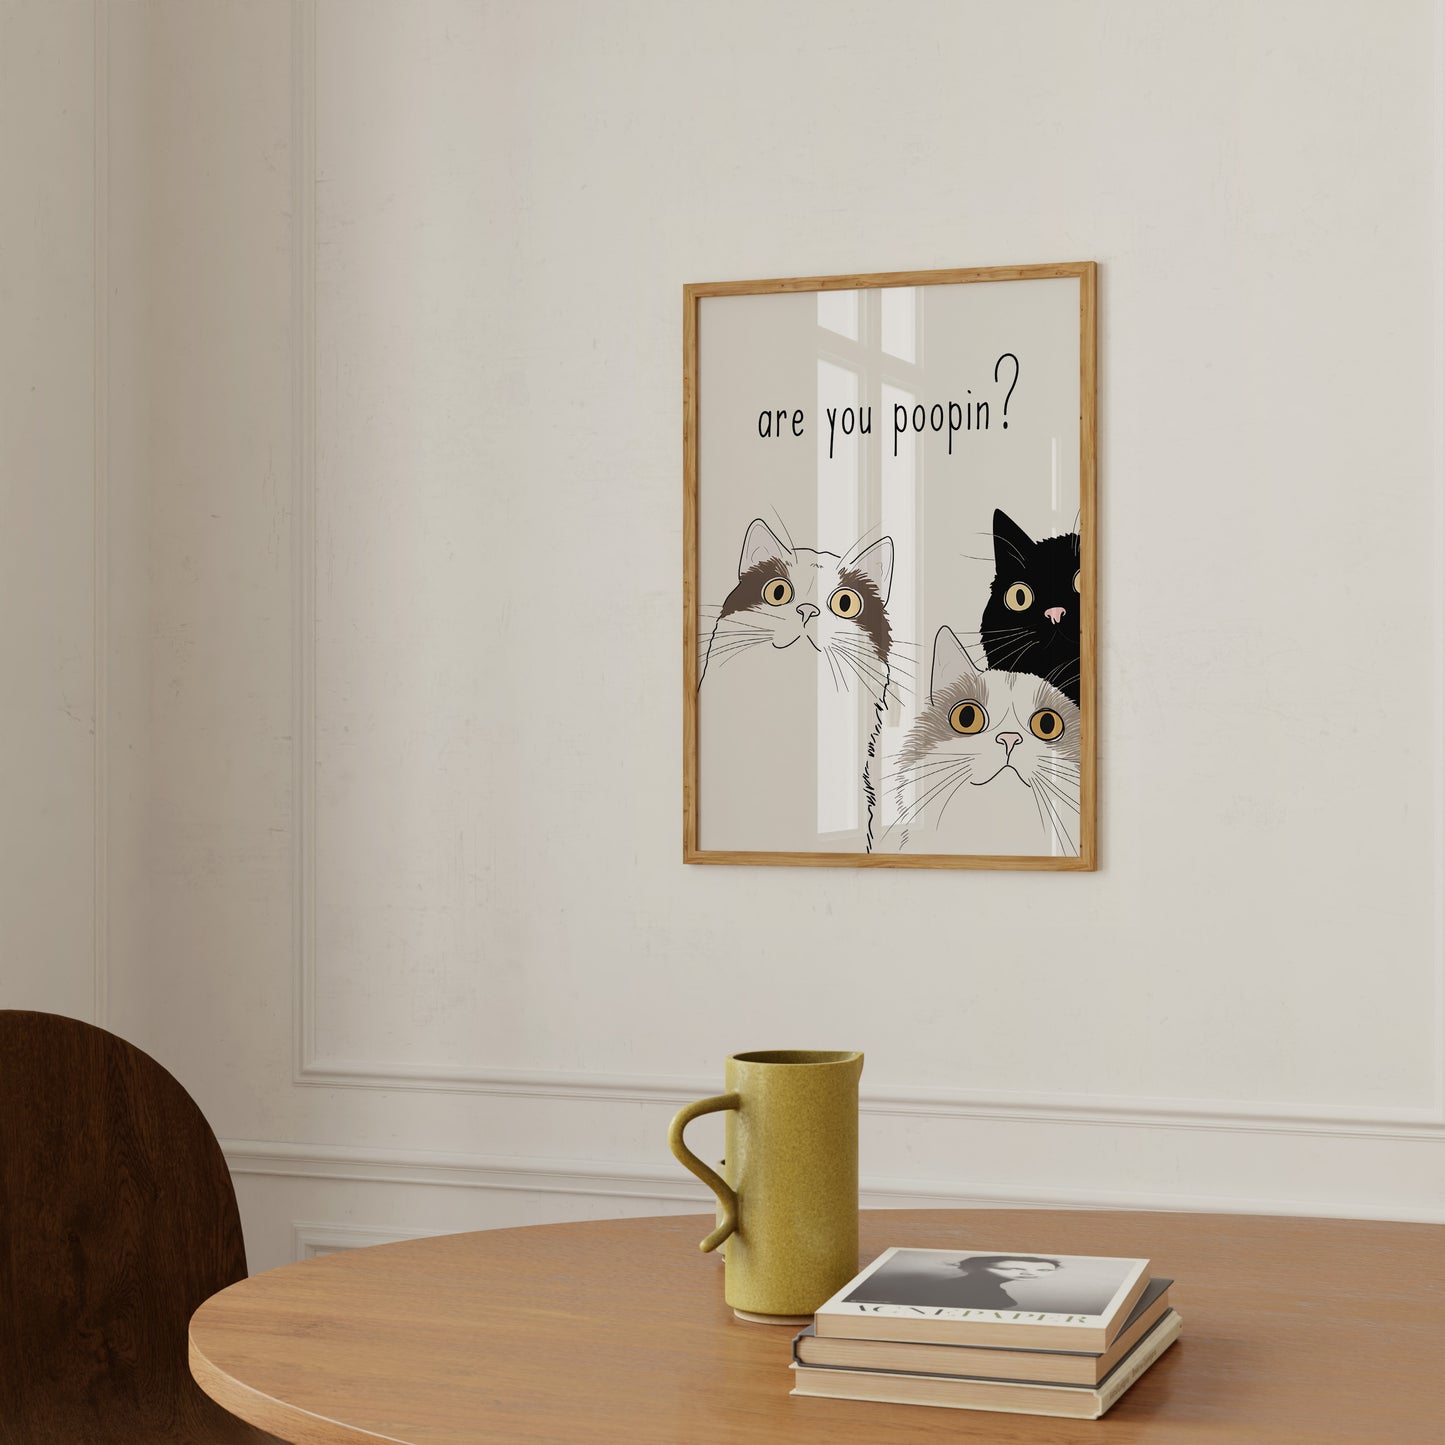 A humorous framed picture on a wall with cats asking "are you poopin?" next to a yellow mug and a book on a table.